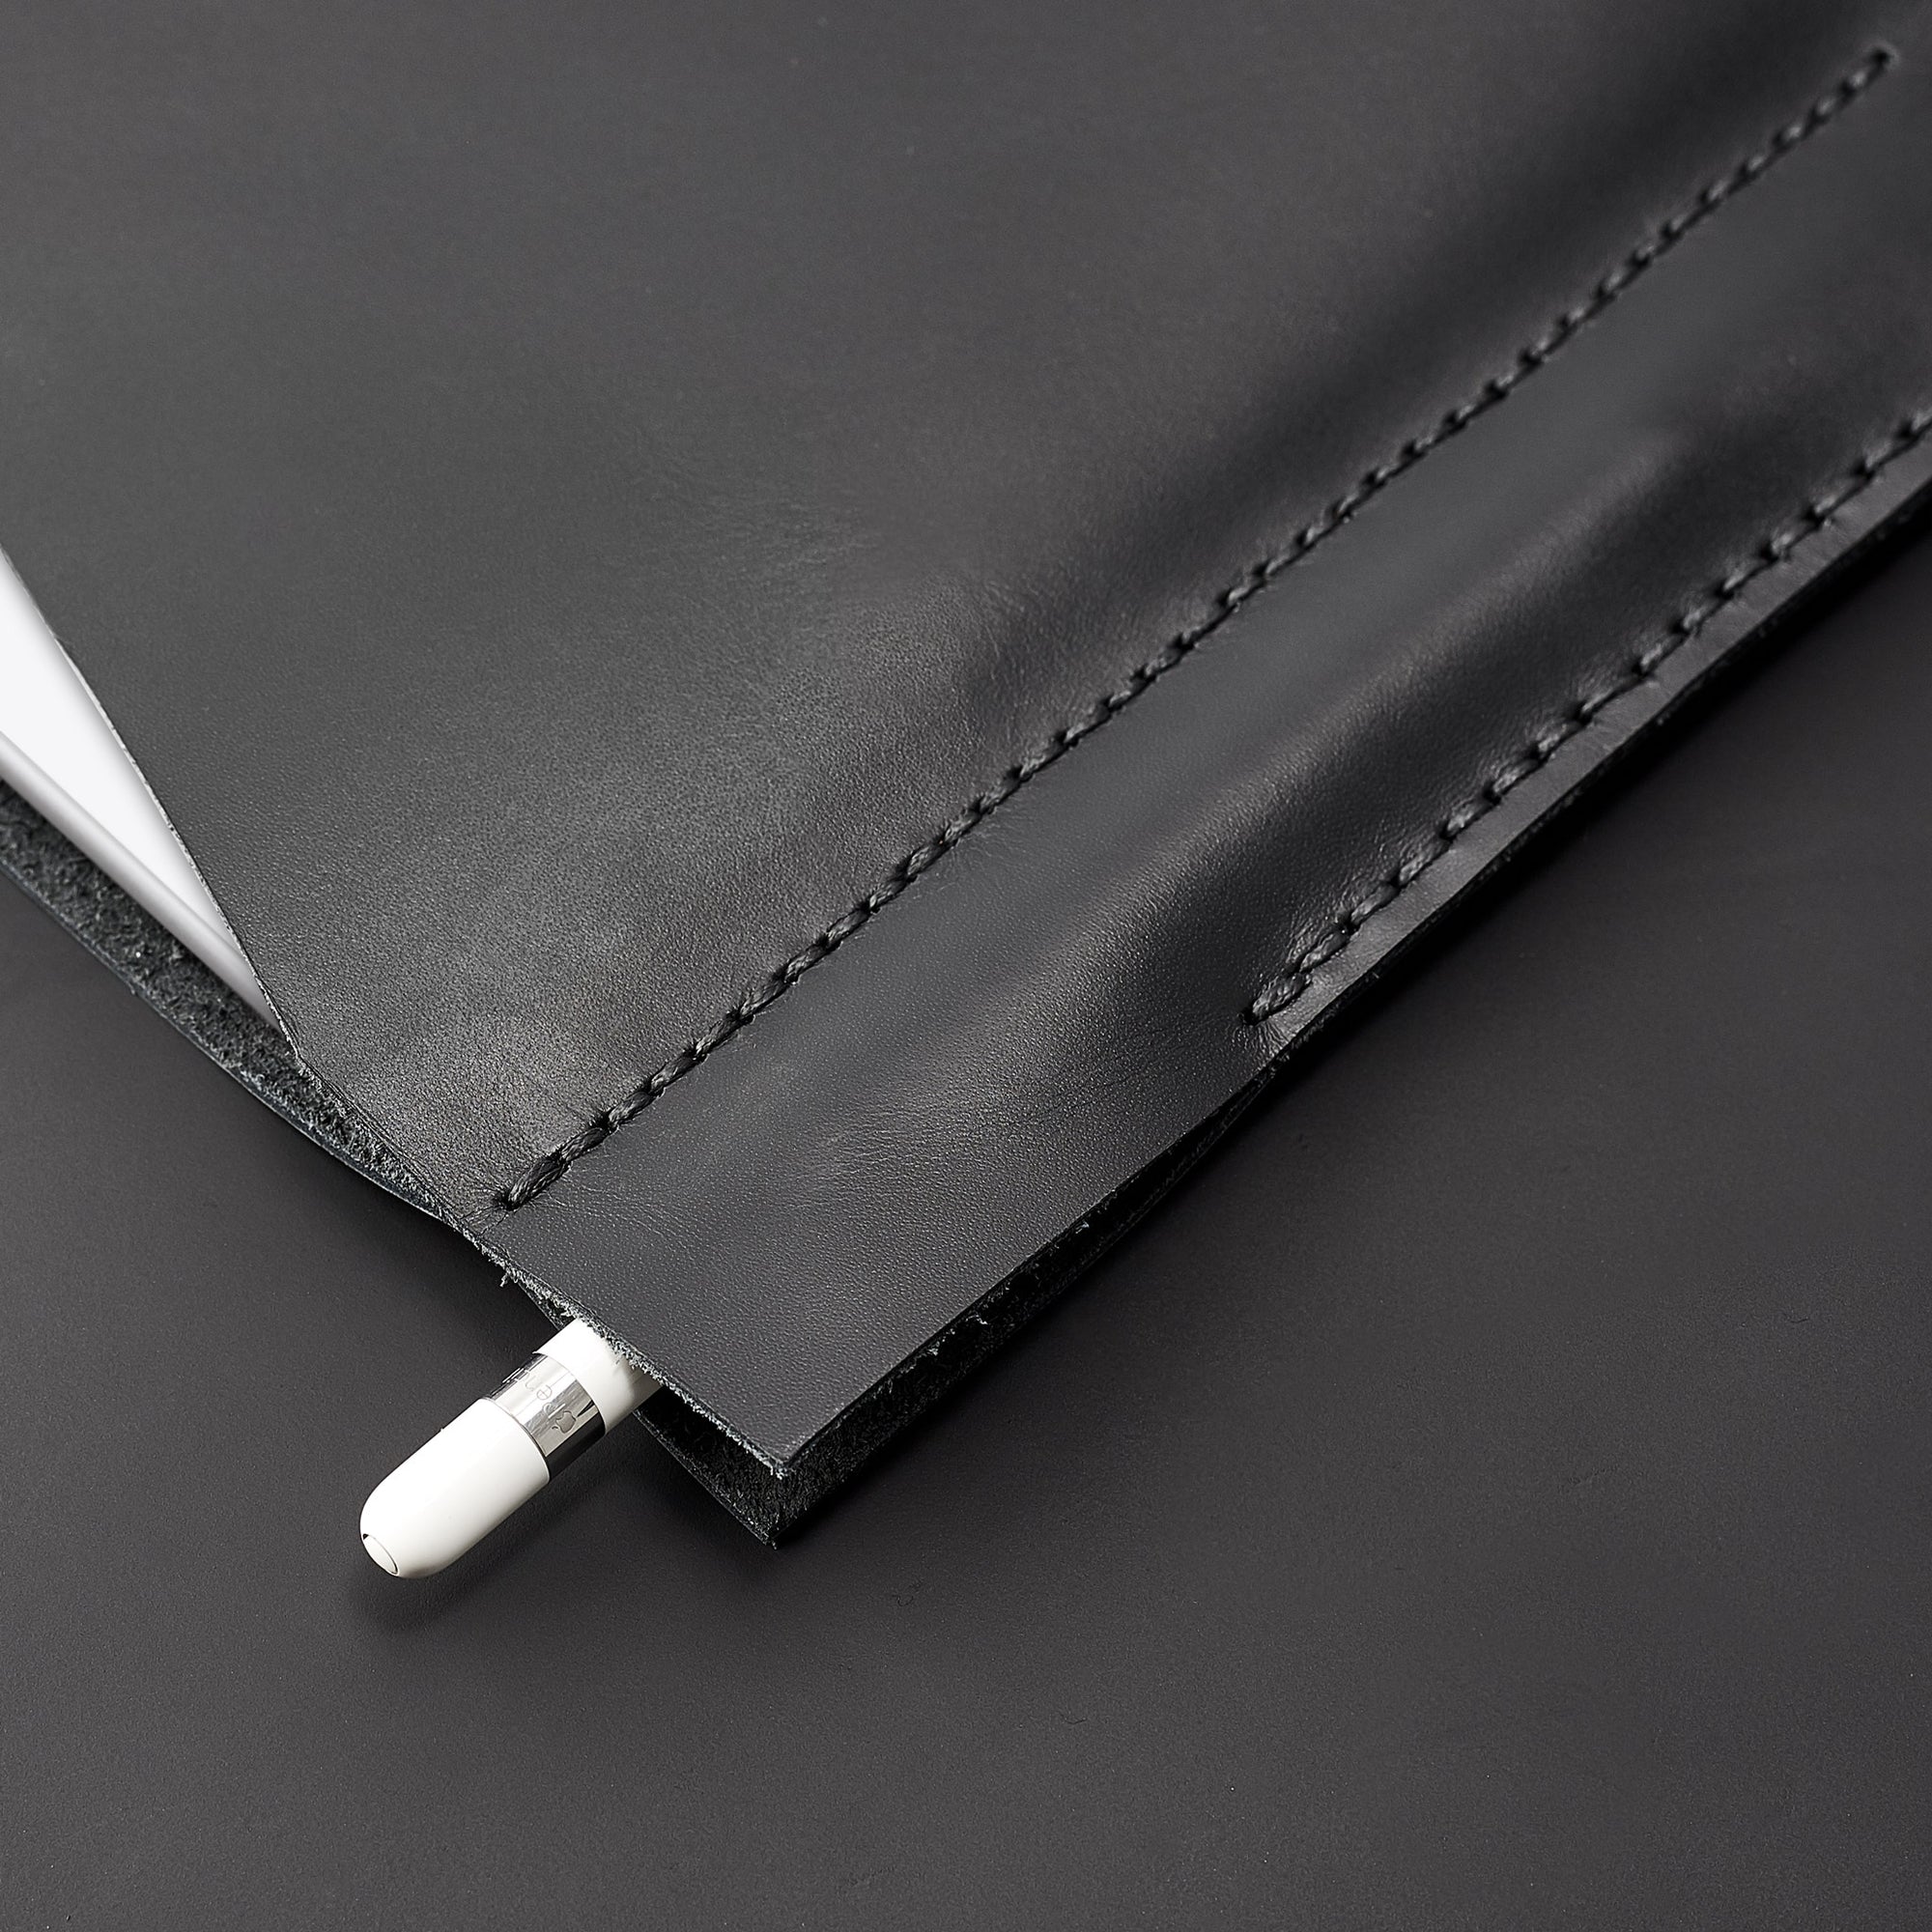 iPad pro black leather sleeve. hand stitched iPad pro leather sleeve. iPad cover, iPad protector, hand stitched cases for men